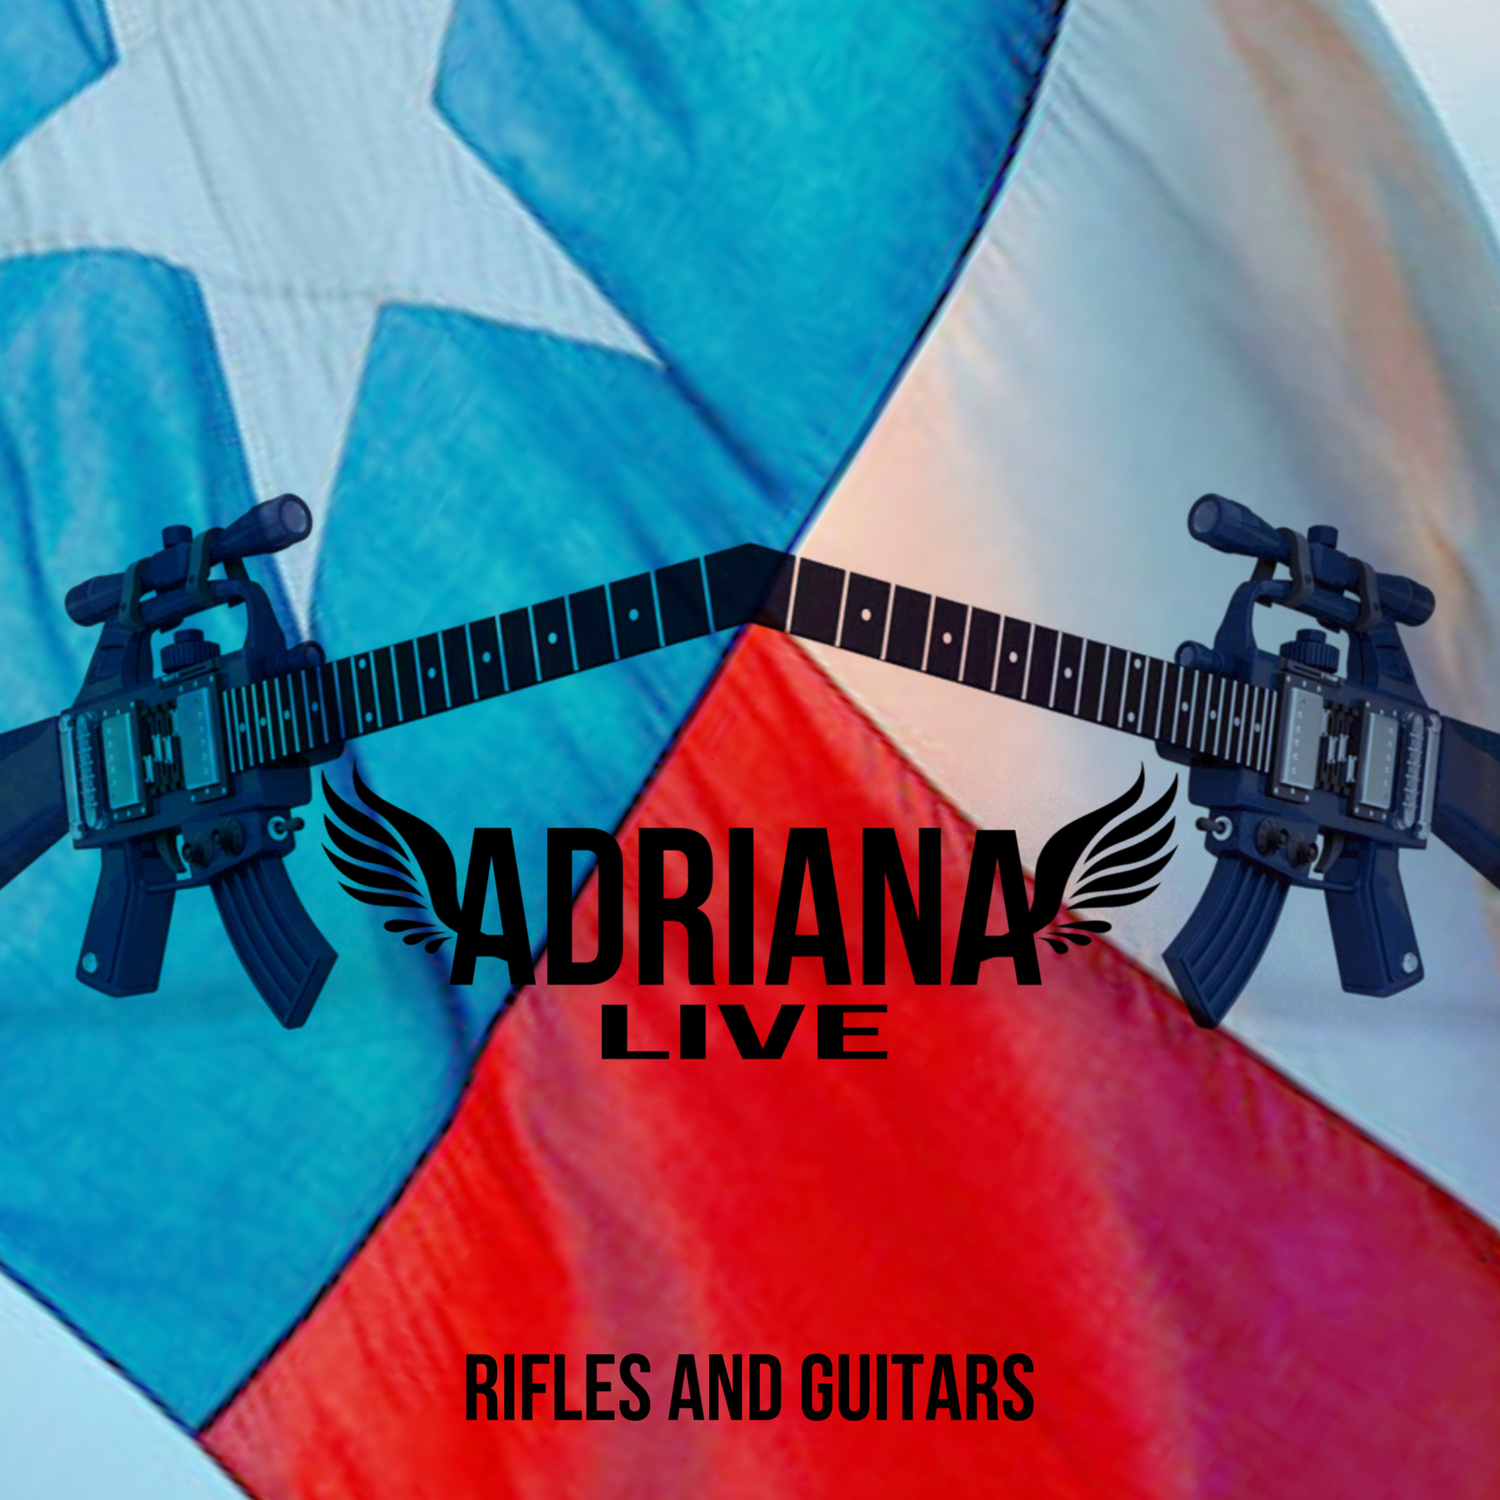 Art for Rifles and Guitars by Adriana Live